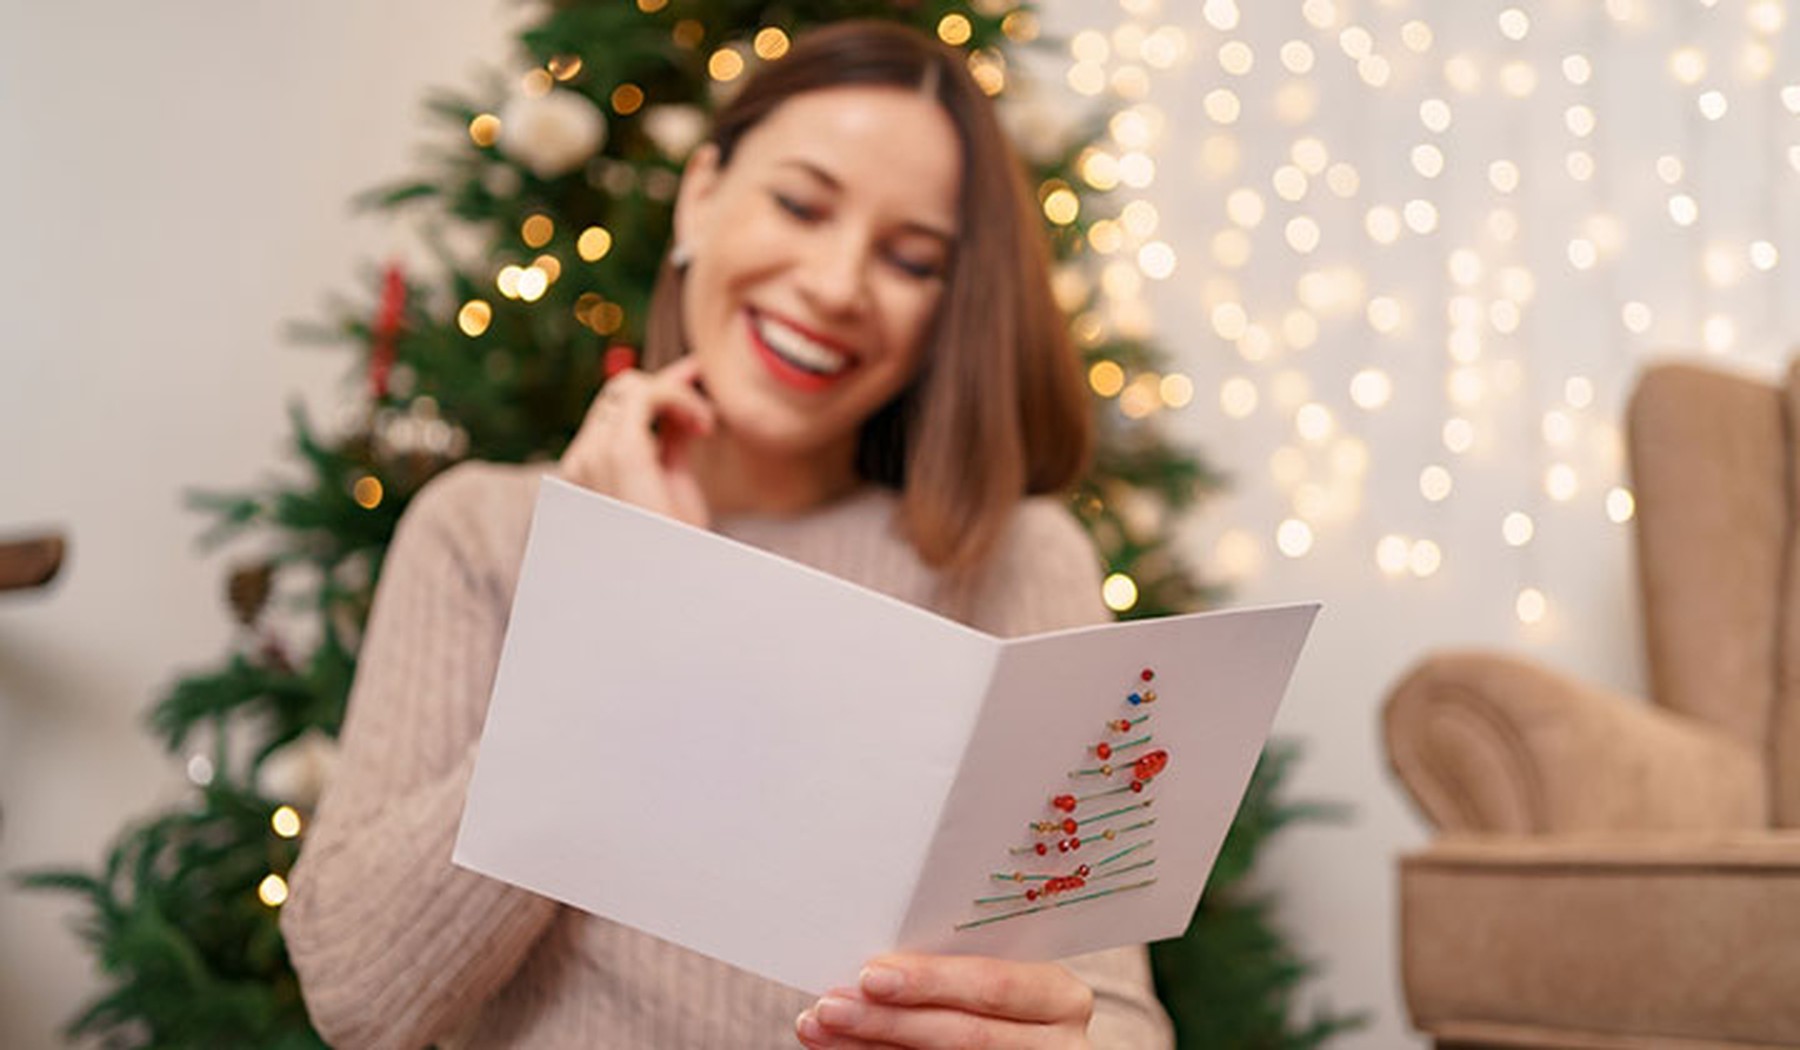 Smiling woman reading card in front of Christmas tree